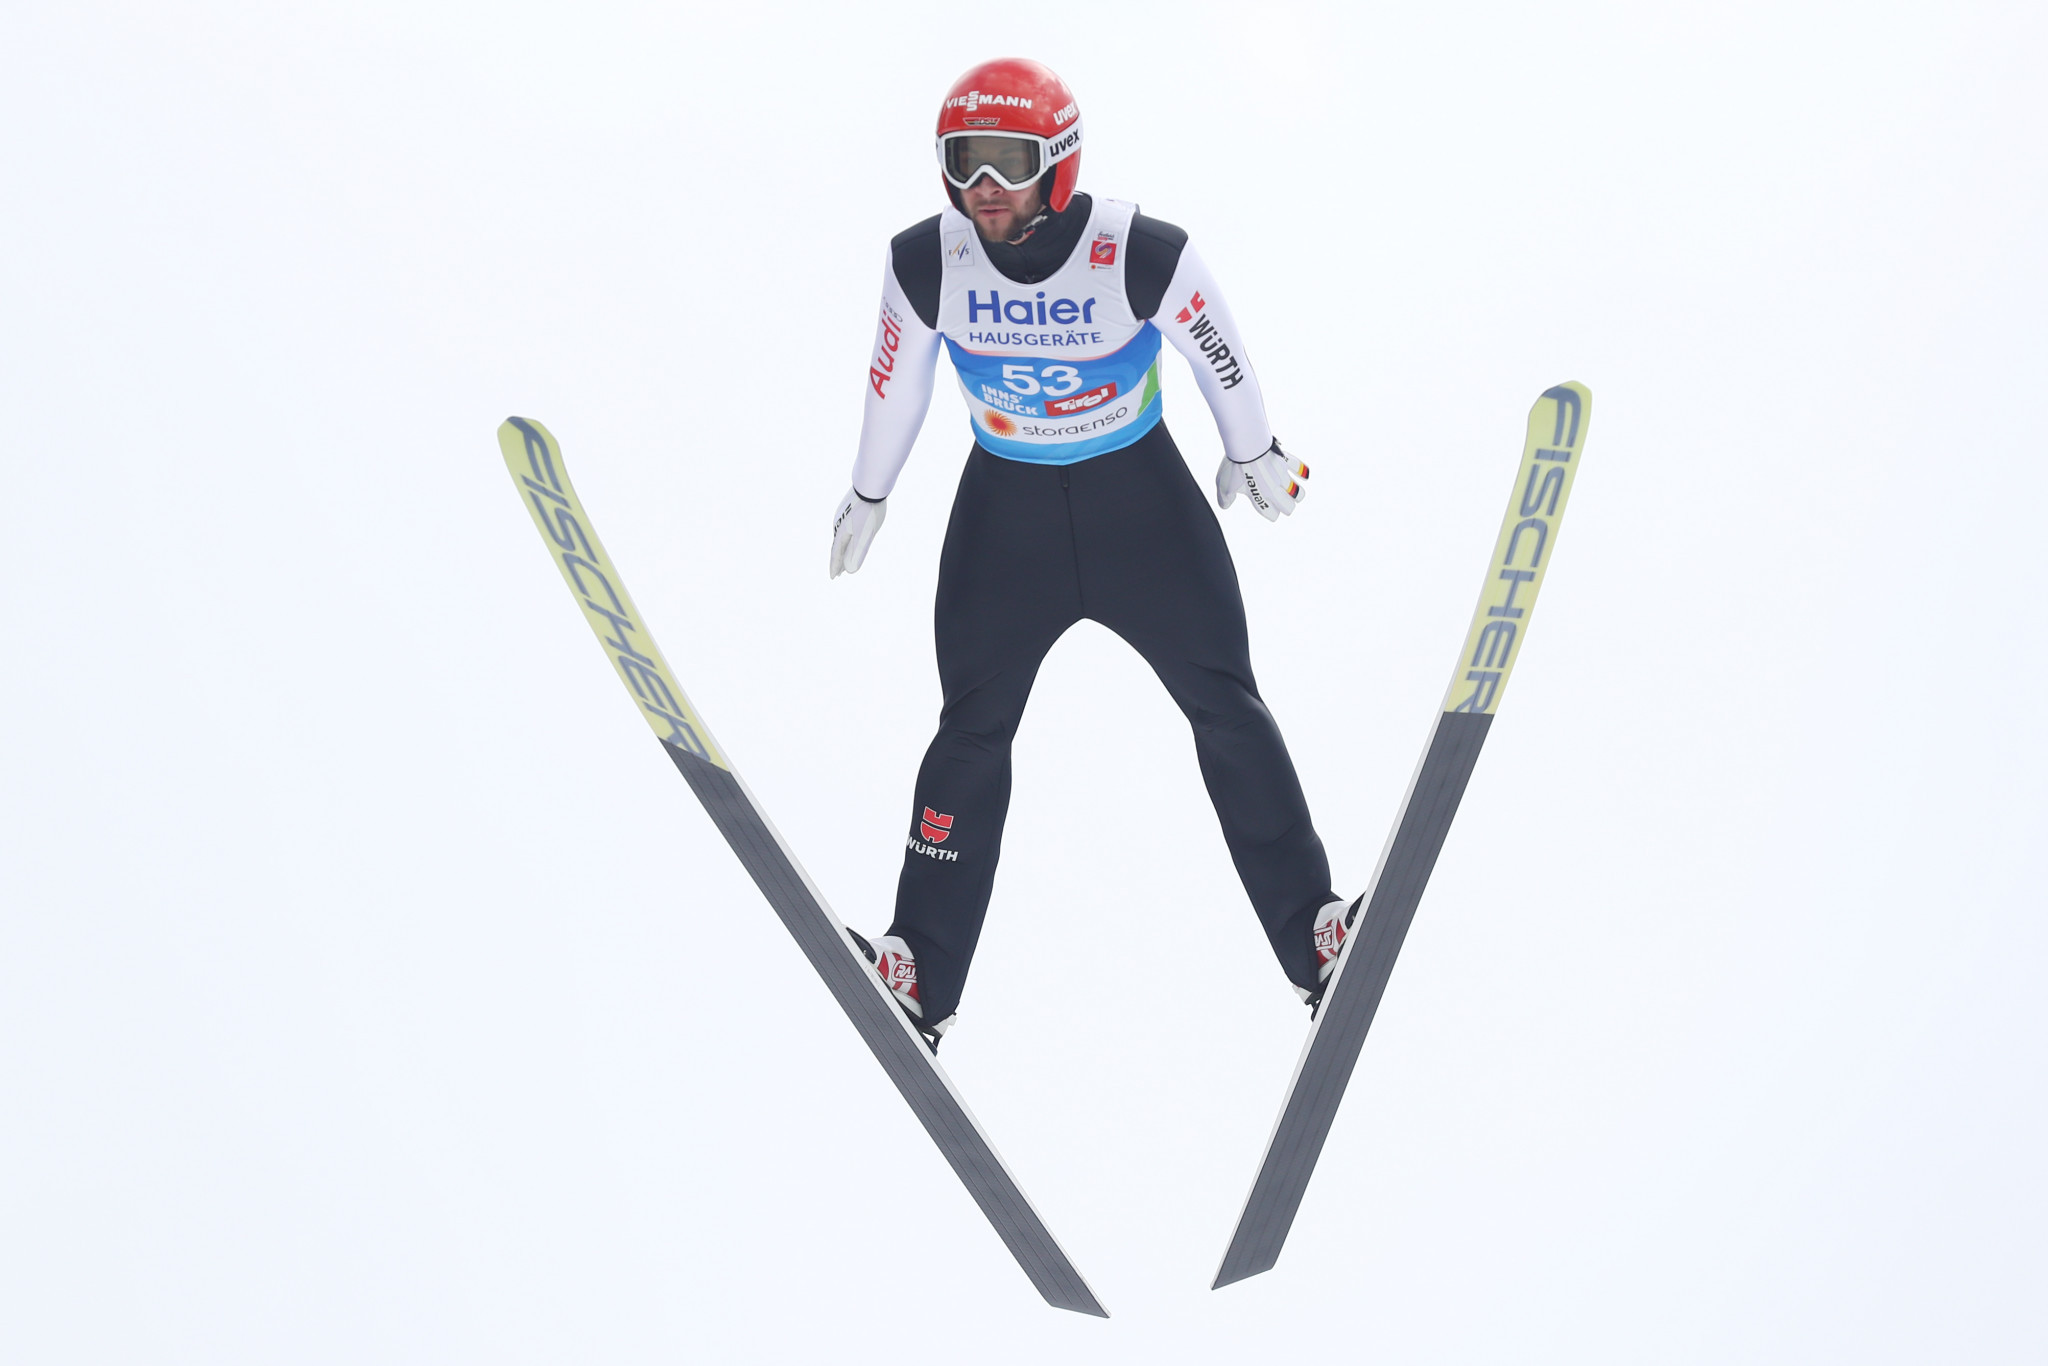 Germany's Markus Eisenbichler topped qualifying in the men's ski jumping at the FIS Nordic World Ski Championships ©Getty Images